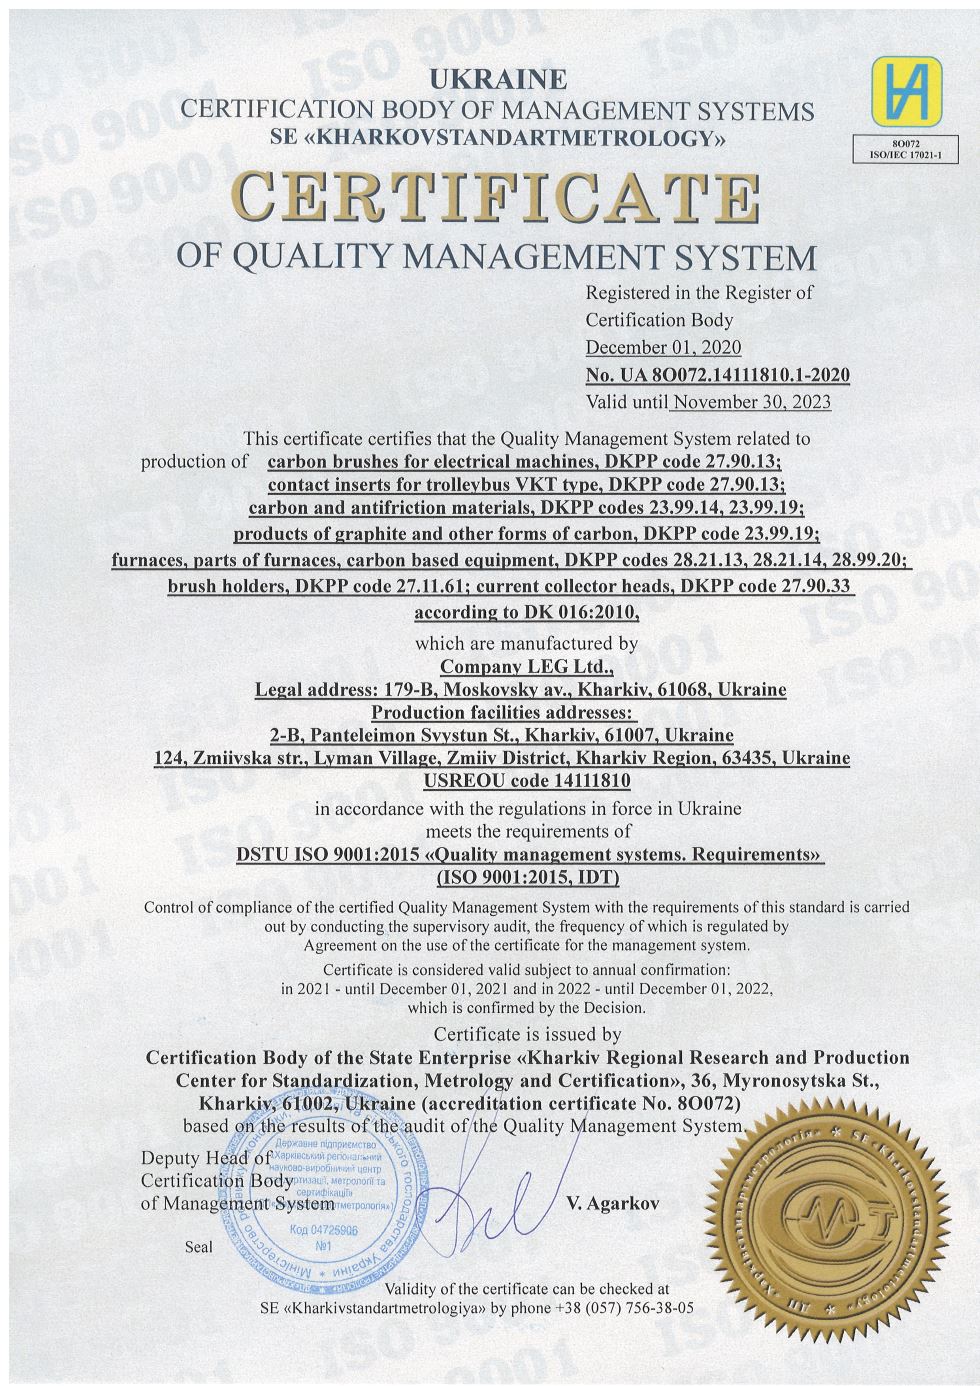 LEG's certificate of registration of quality management system to ISO 9001